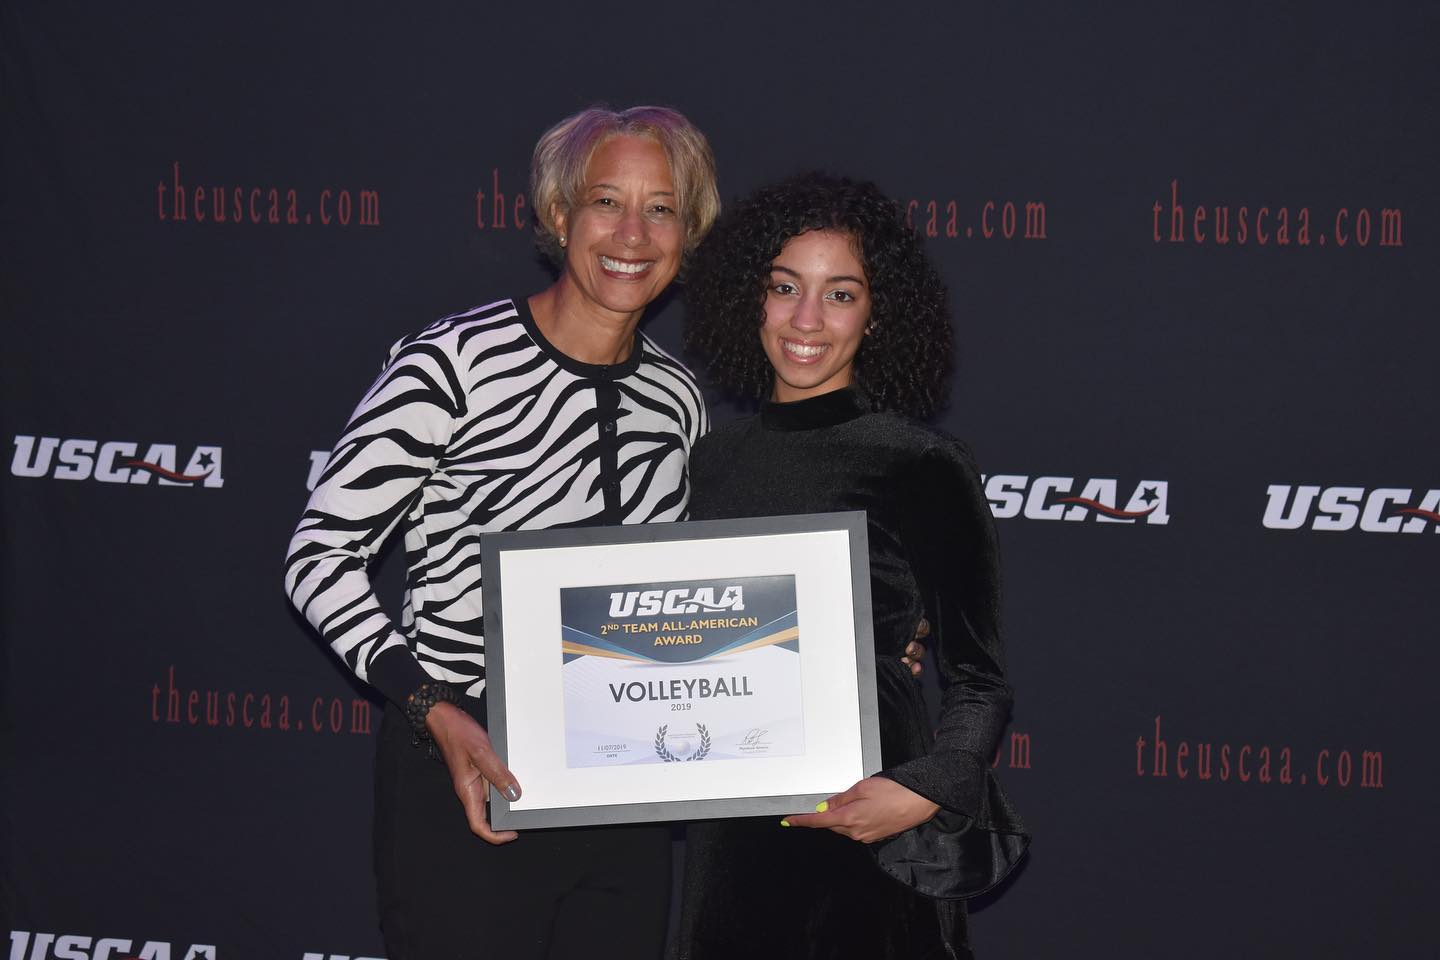 Women's Volleyball player Andrea Romero receiving All american second team Award